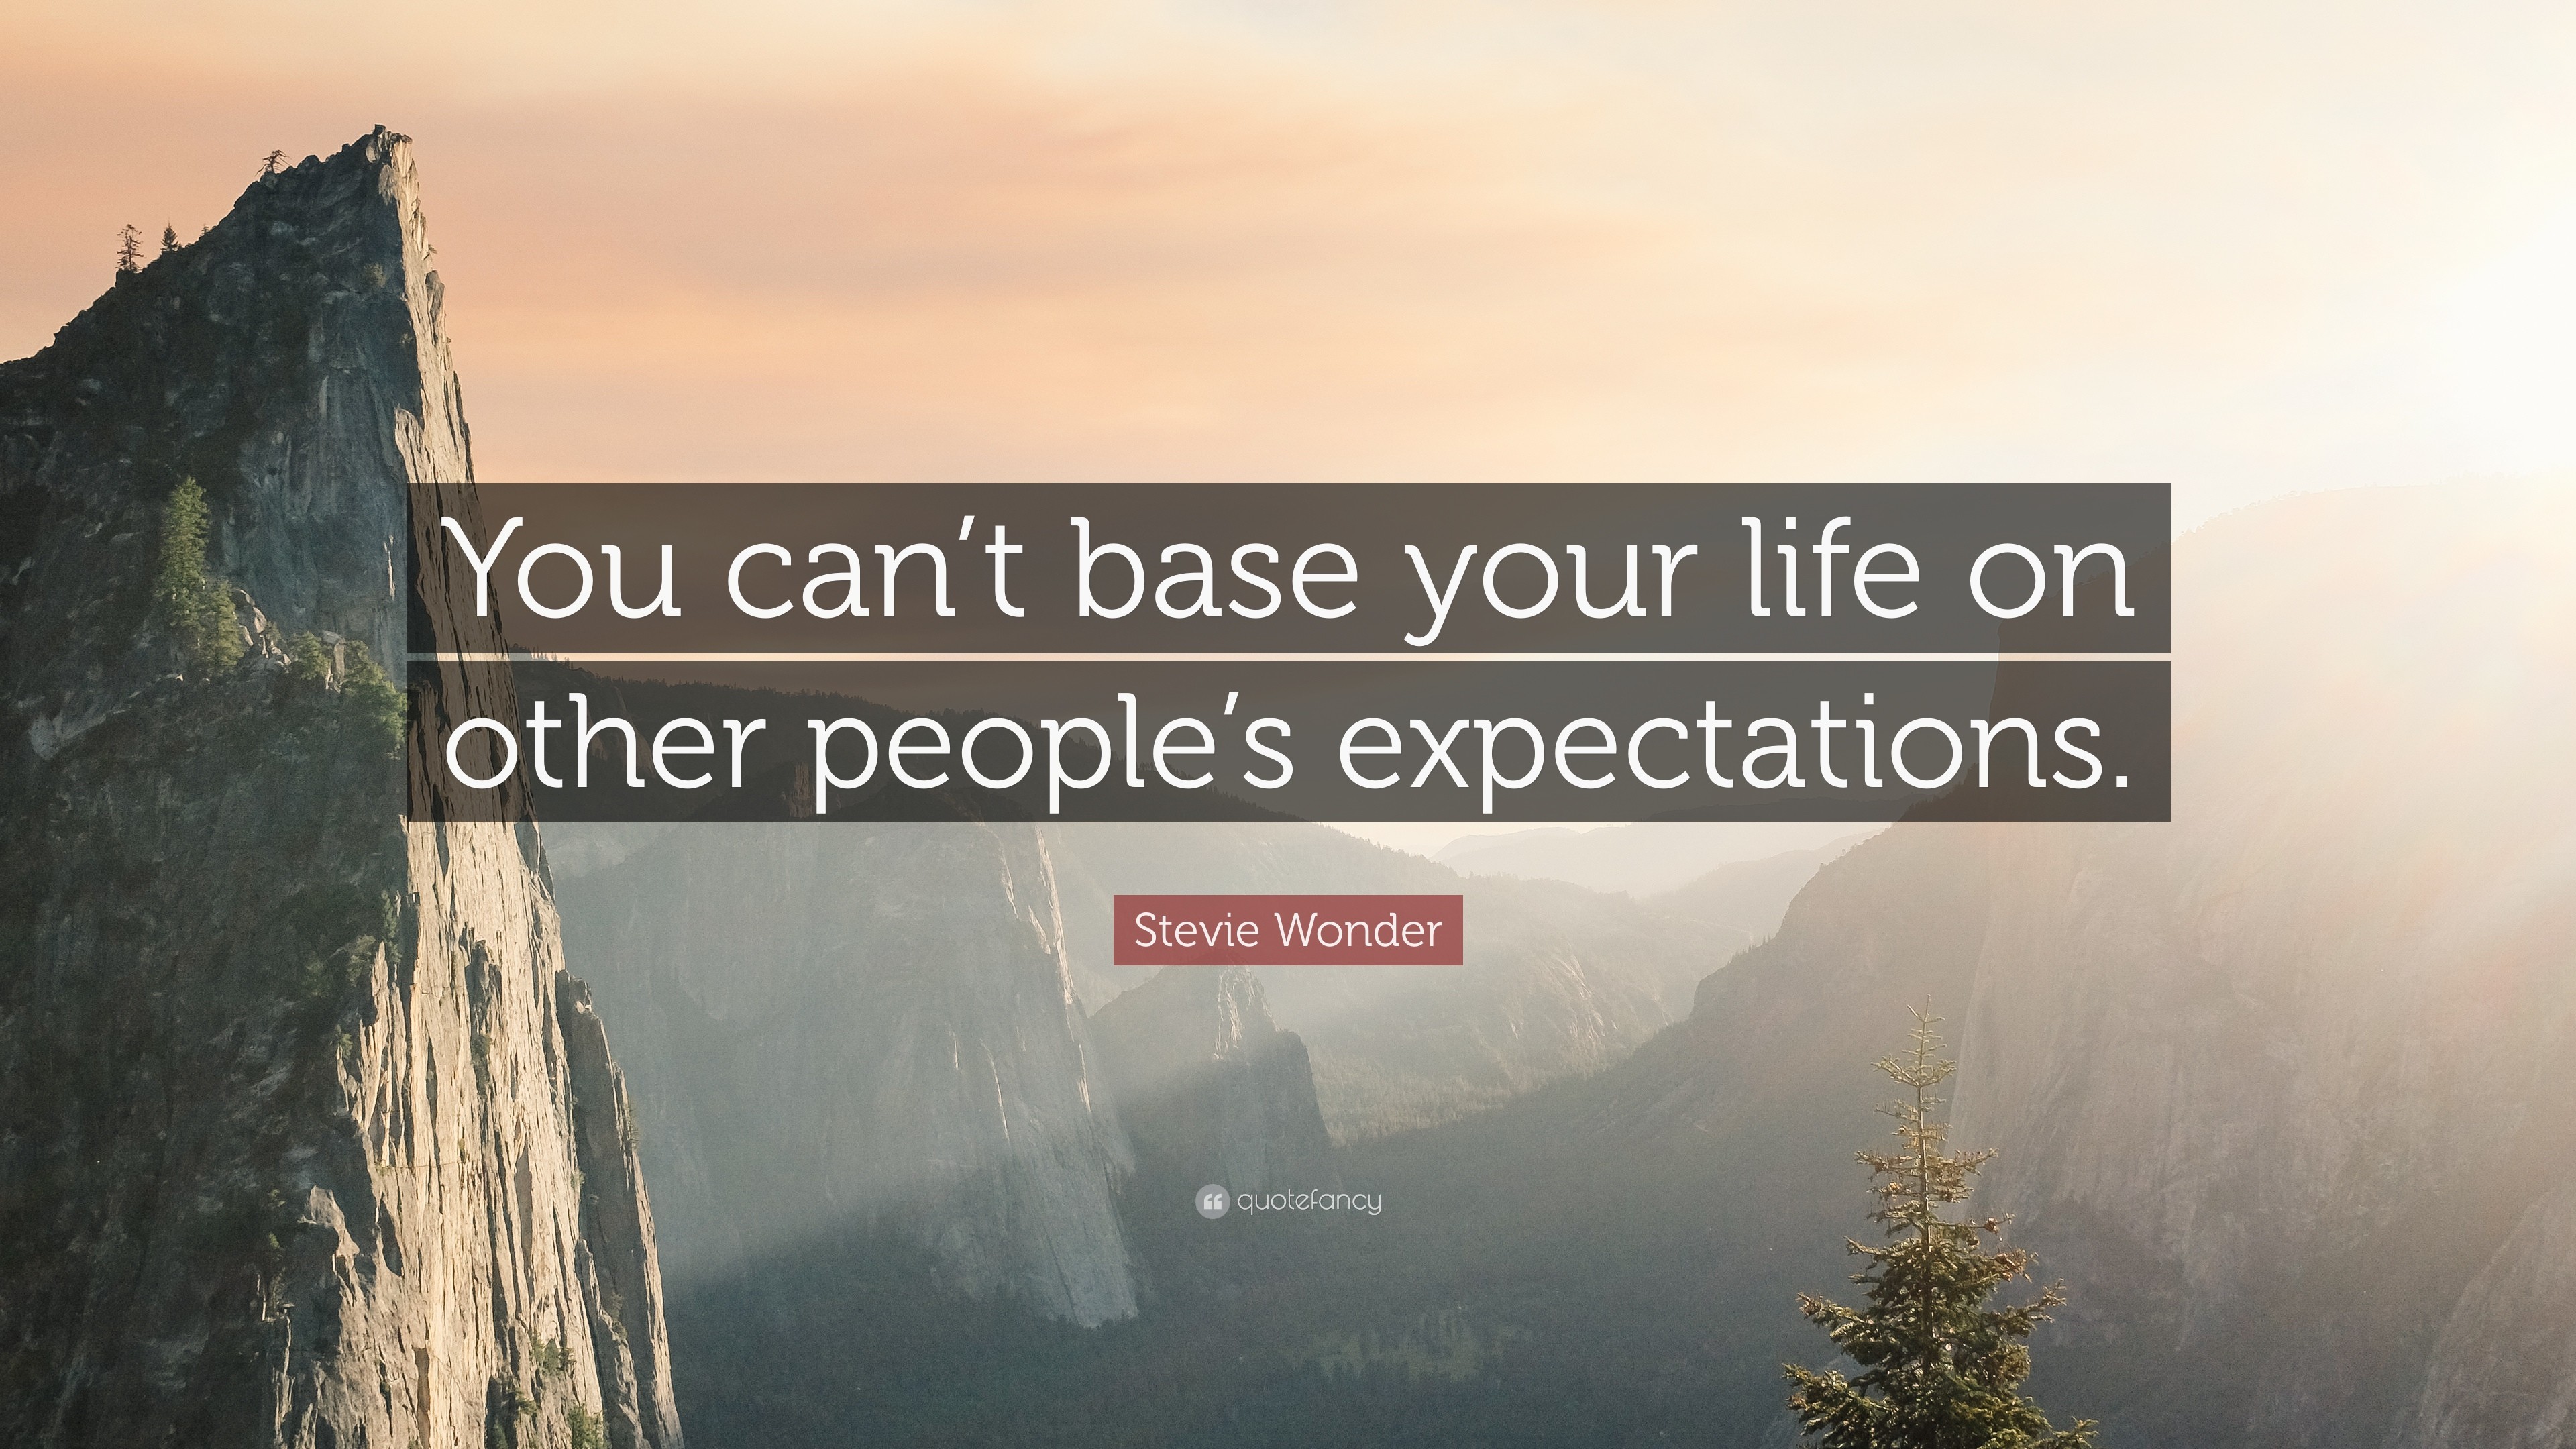 3840x2160 Stevie Wonder Quote: “You can't base your life on other people's  expectations